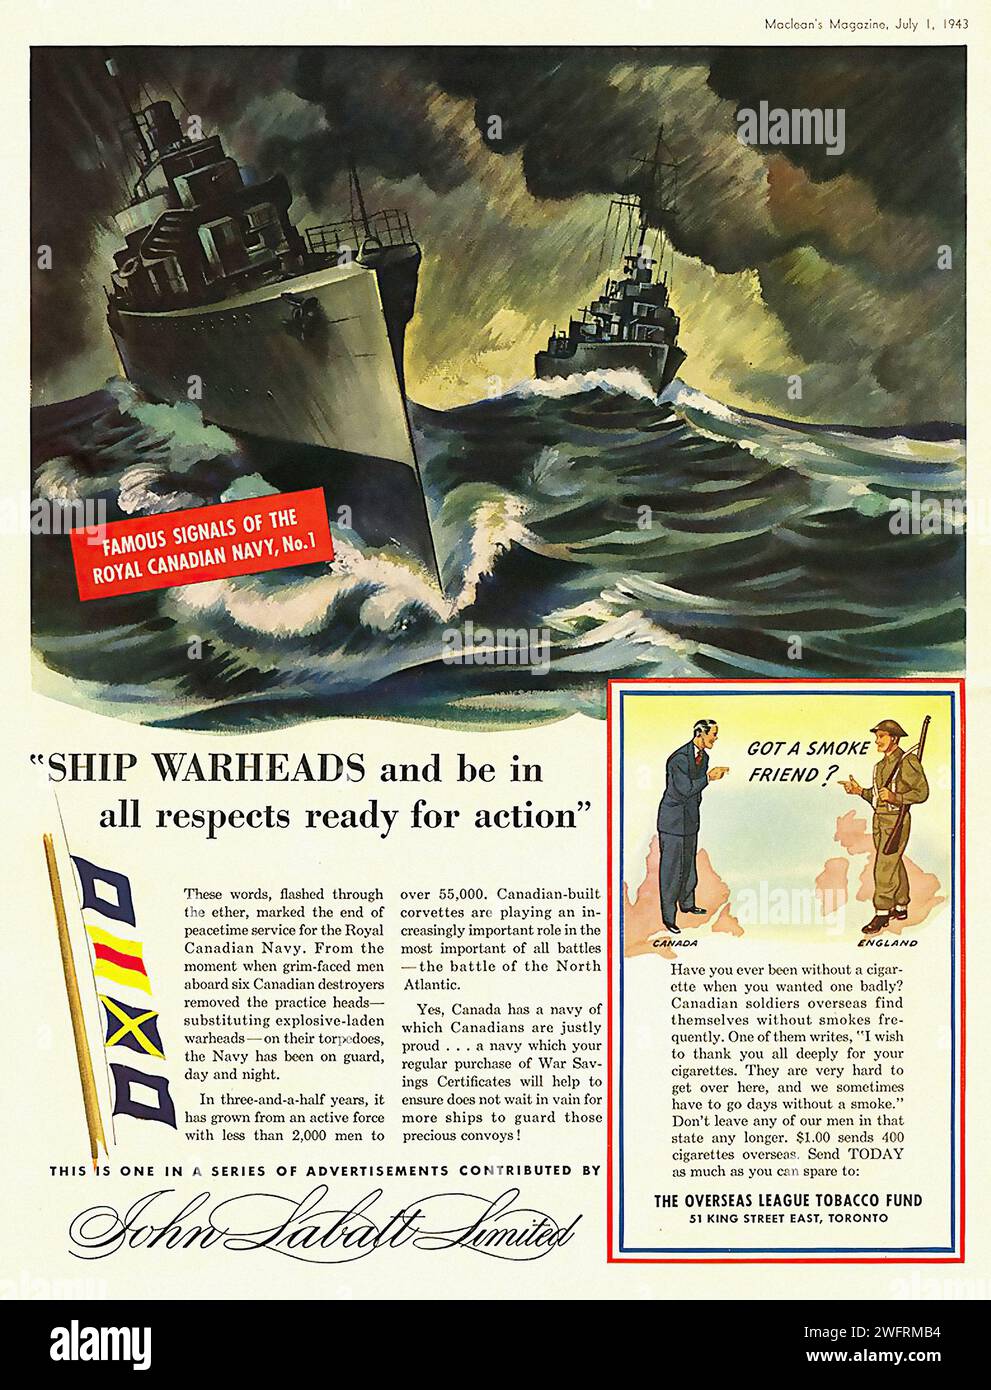 “FAMOUS SIGNALS OF THE ROYAL CANADIAN NAVY, NO. 1 “SHIP READY AND BE IN ALL RESPECTS READY FOR ACTION”. THIS IS ONE IN A SERIES OF ADVERTISEMENTS CONTRIBUTED BY JOHN LABATT LIMITED TO THE OVERSEAS LEAGUE TOBACCO FUND.”  This is a vintage advertisement for the Royal Canadian Navy, dated July 6, 1943. The advertisement is a full-page color illustration, featuring a large grey battleship with a black hull in rough, green waters under a dark and stormy sky. The bottom half of the advertisement showcases a smaller illustration of a sailor in uniform smoking a cigarette. The graphic style of the ima Stock Photo